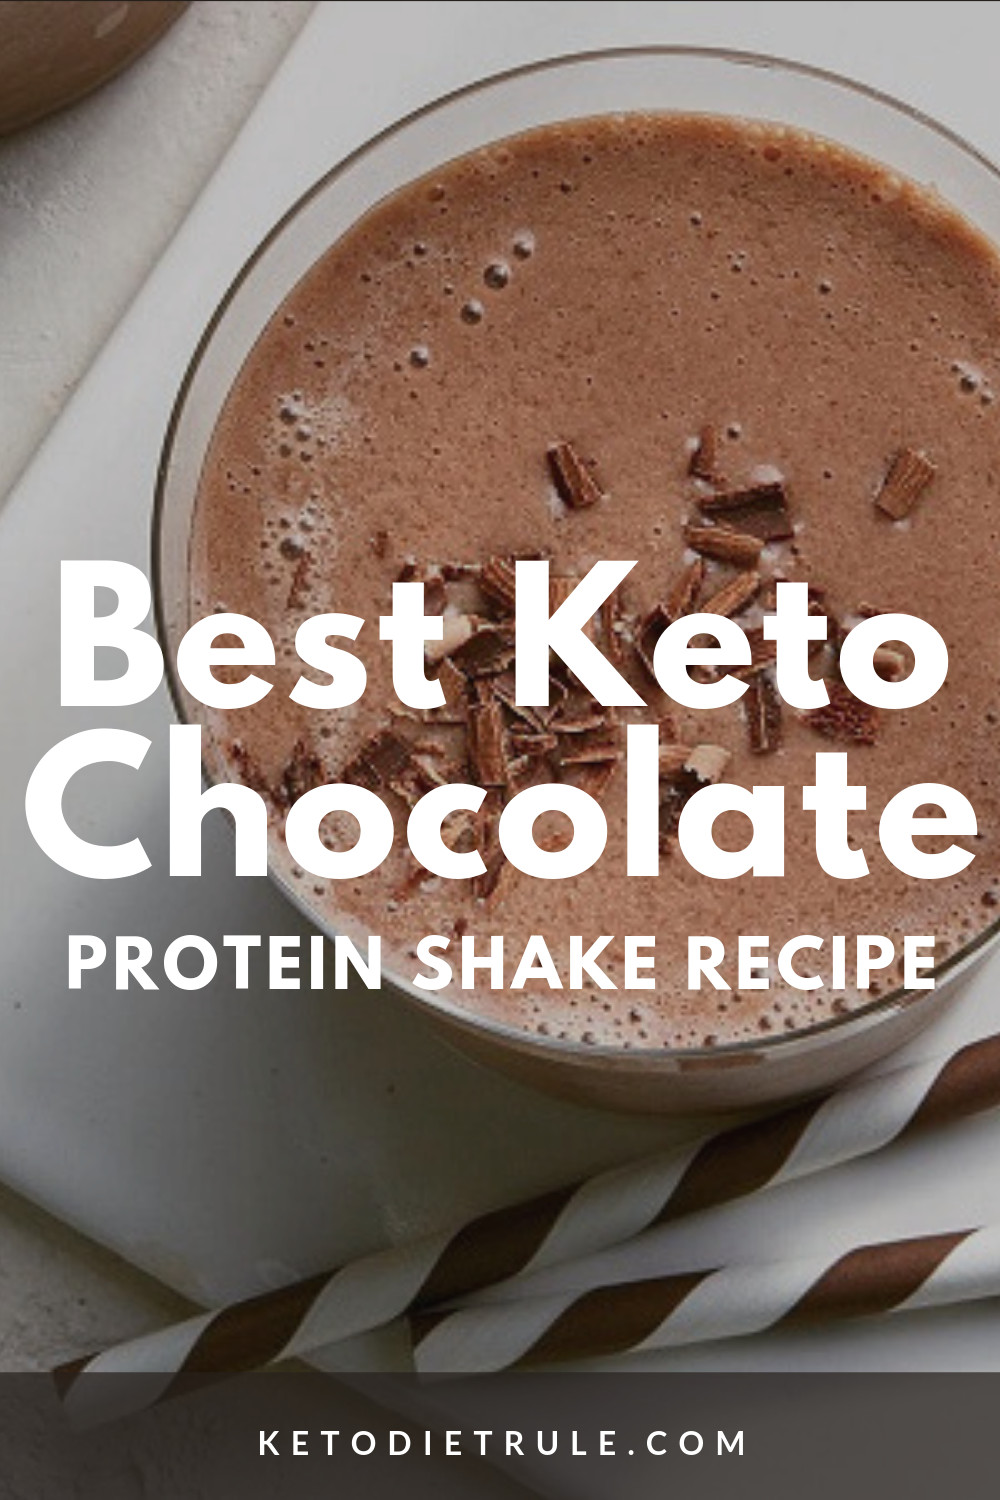 Low Carb Protein Shake Recipes For Weight Loss
 The Best Chocolate Keto Protein Shake Recipe Under 10g of